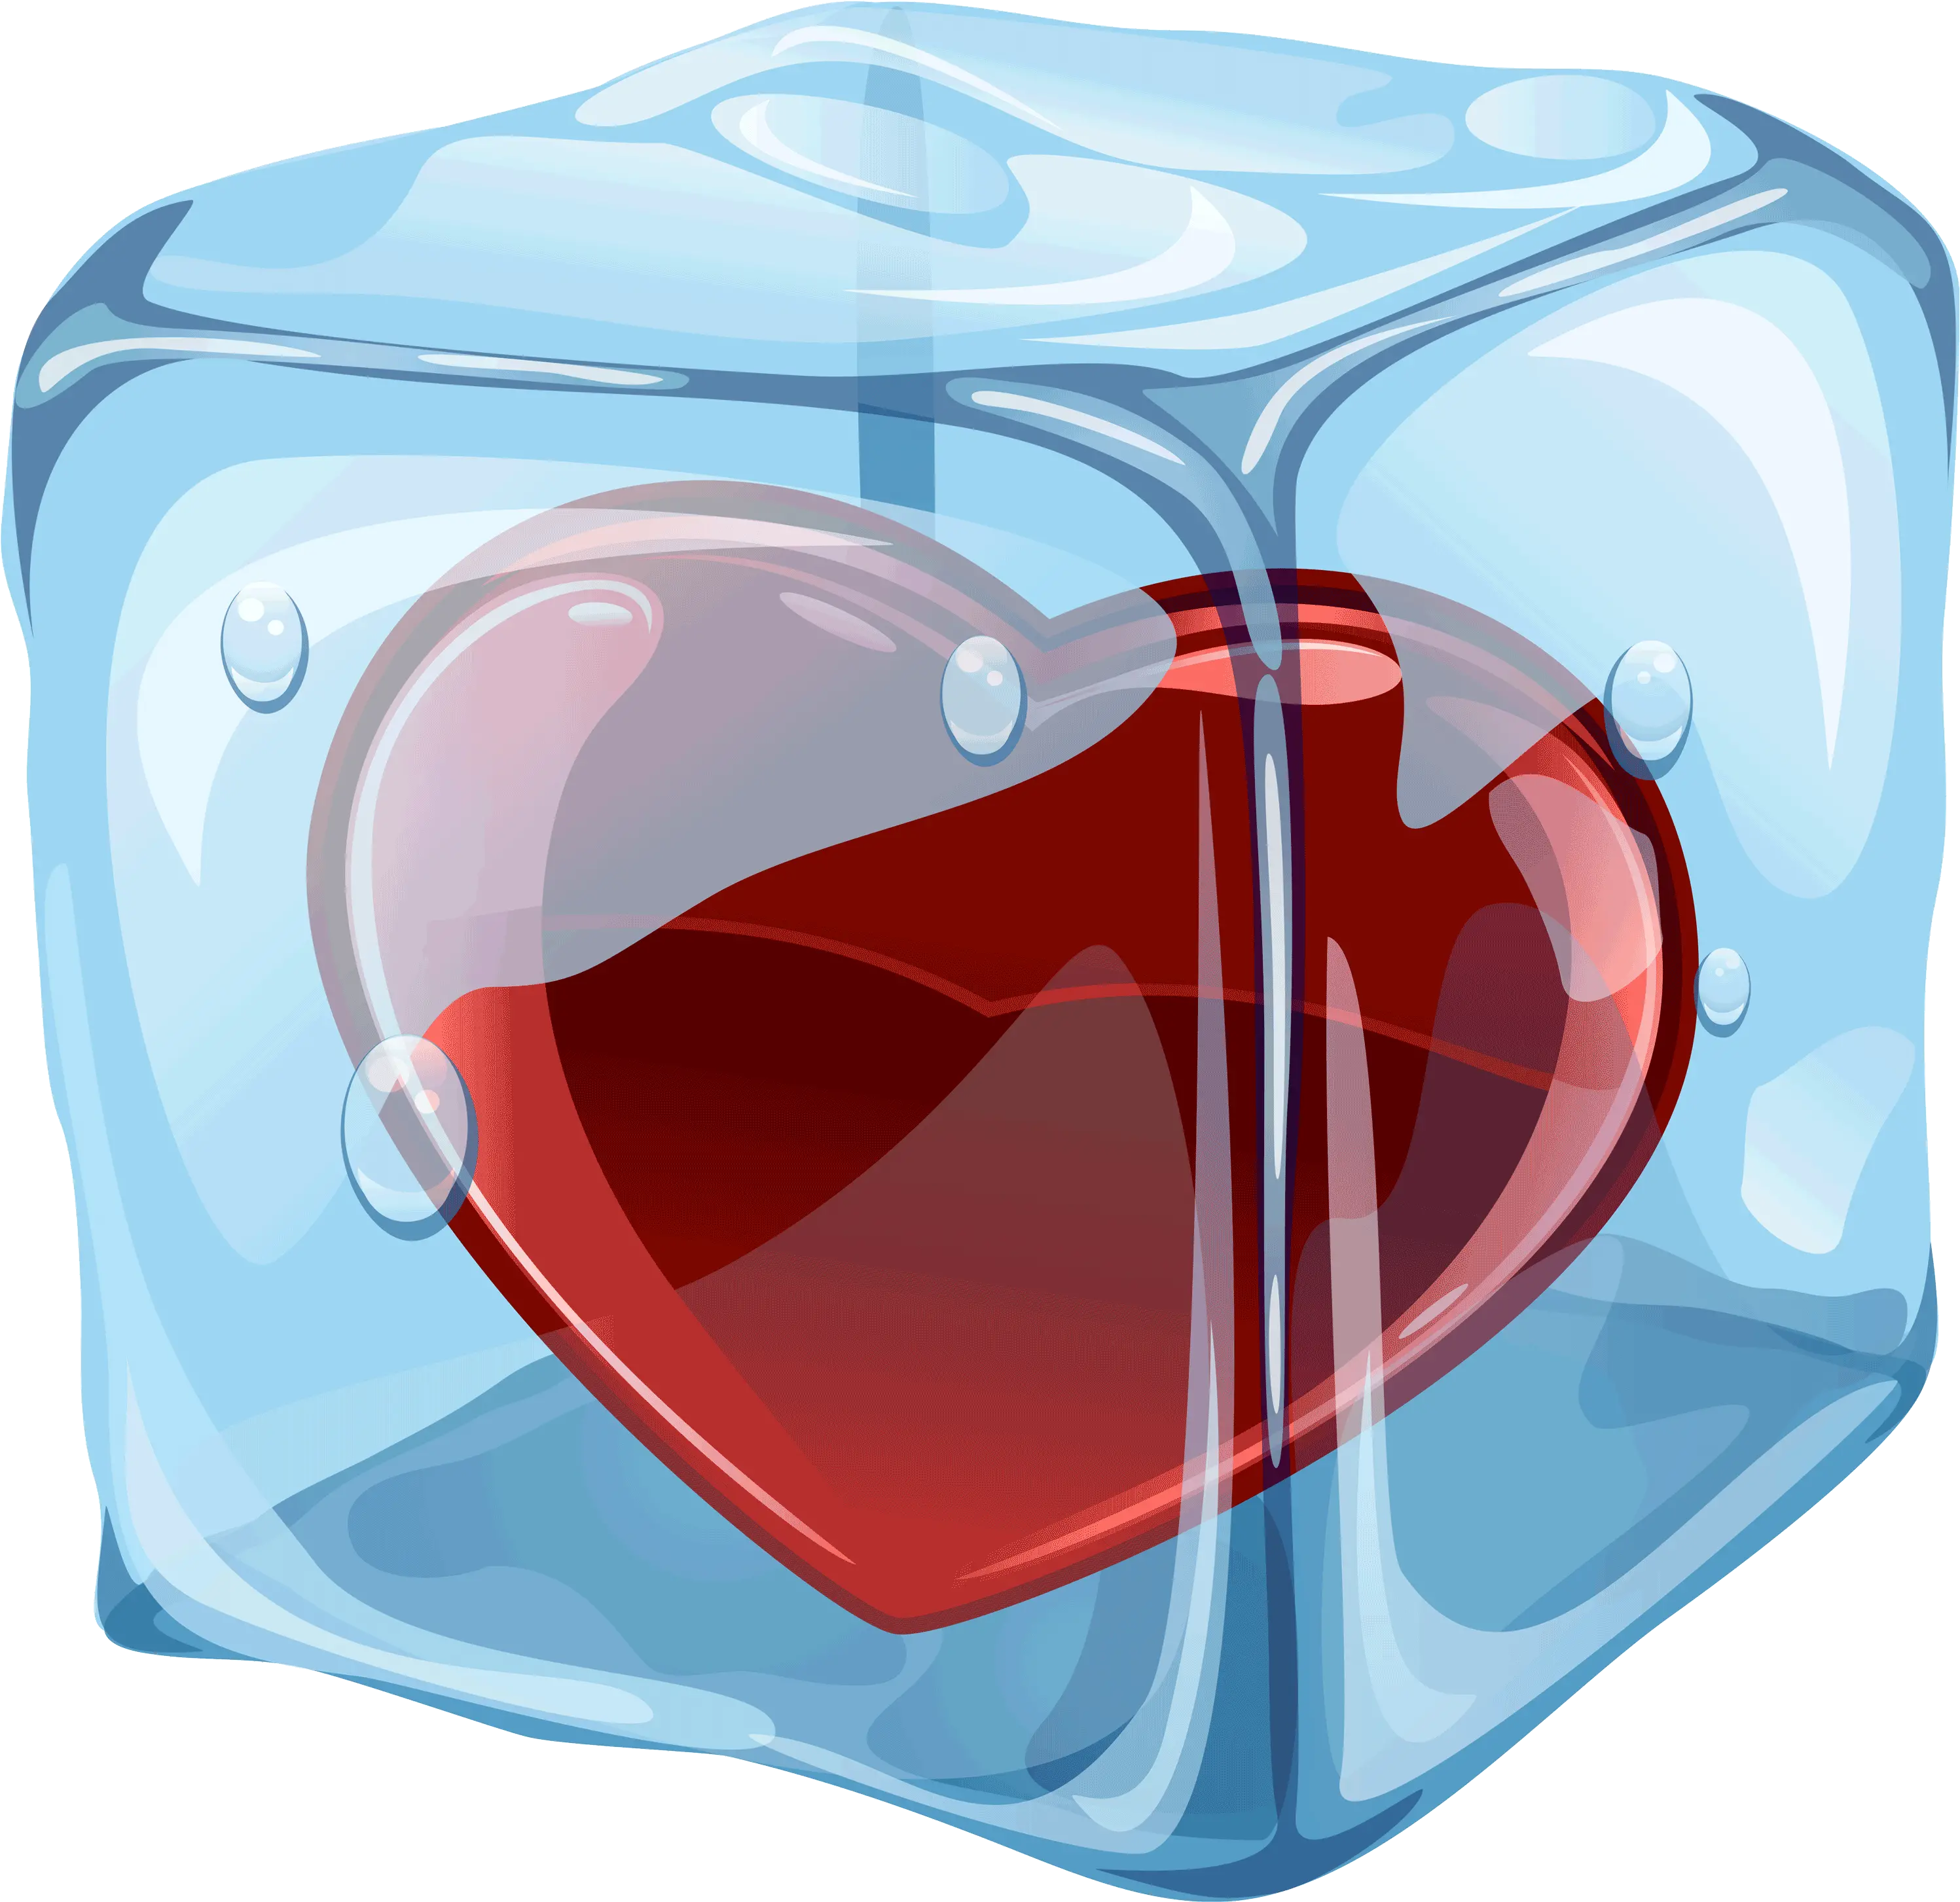 Heart In Ice Cube Png Clipart Heart In Ice Cube Cube Transparent Background